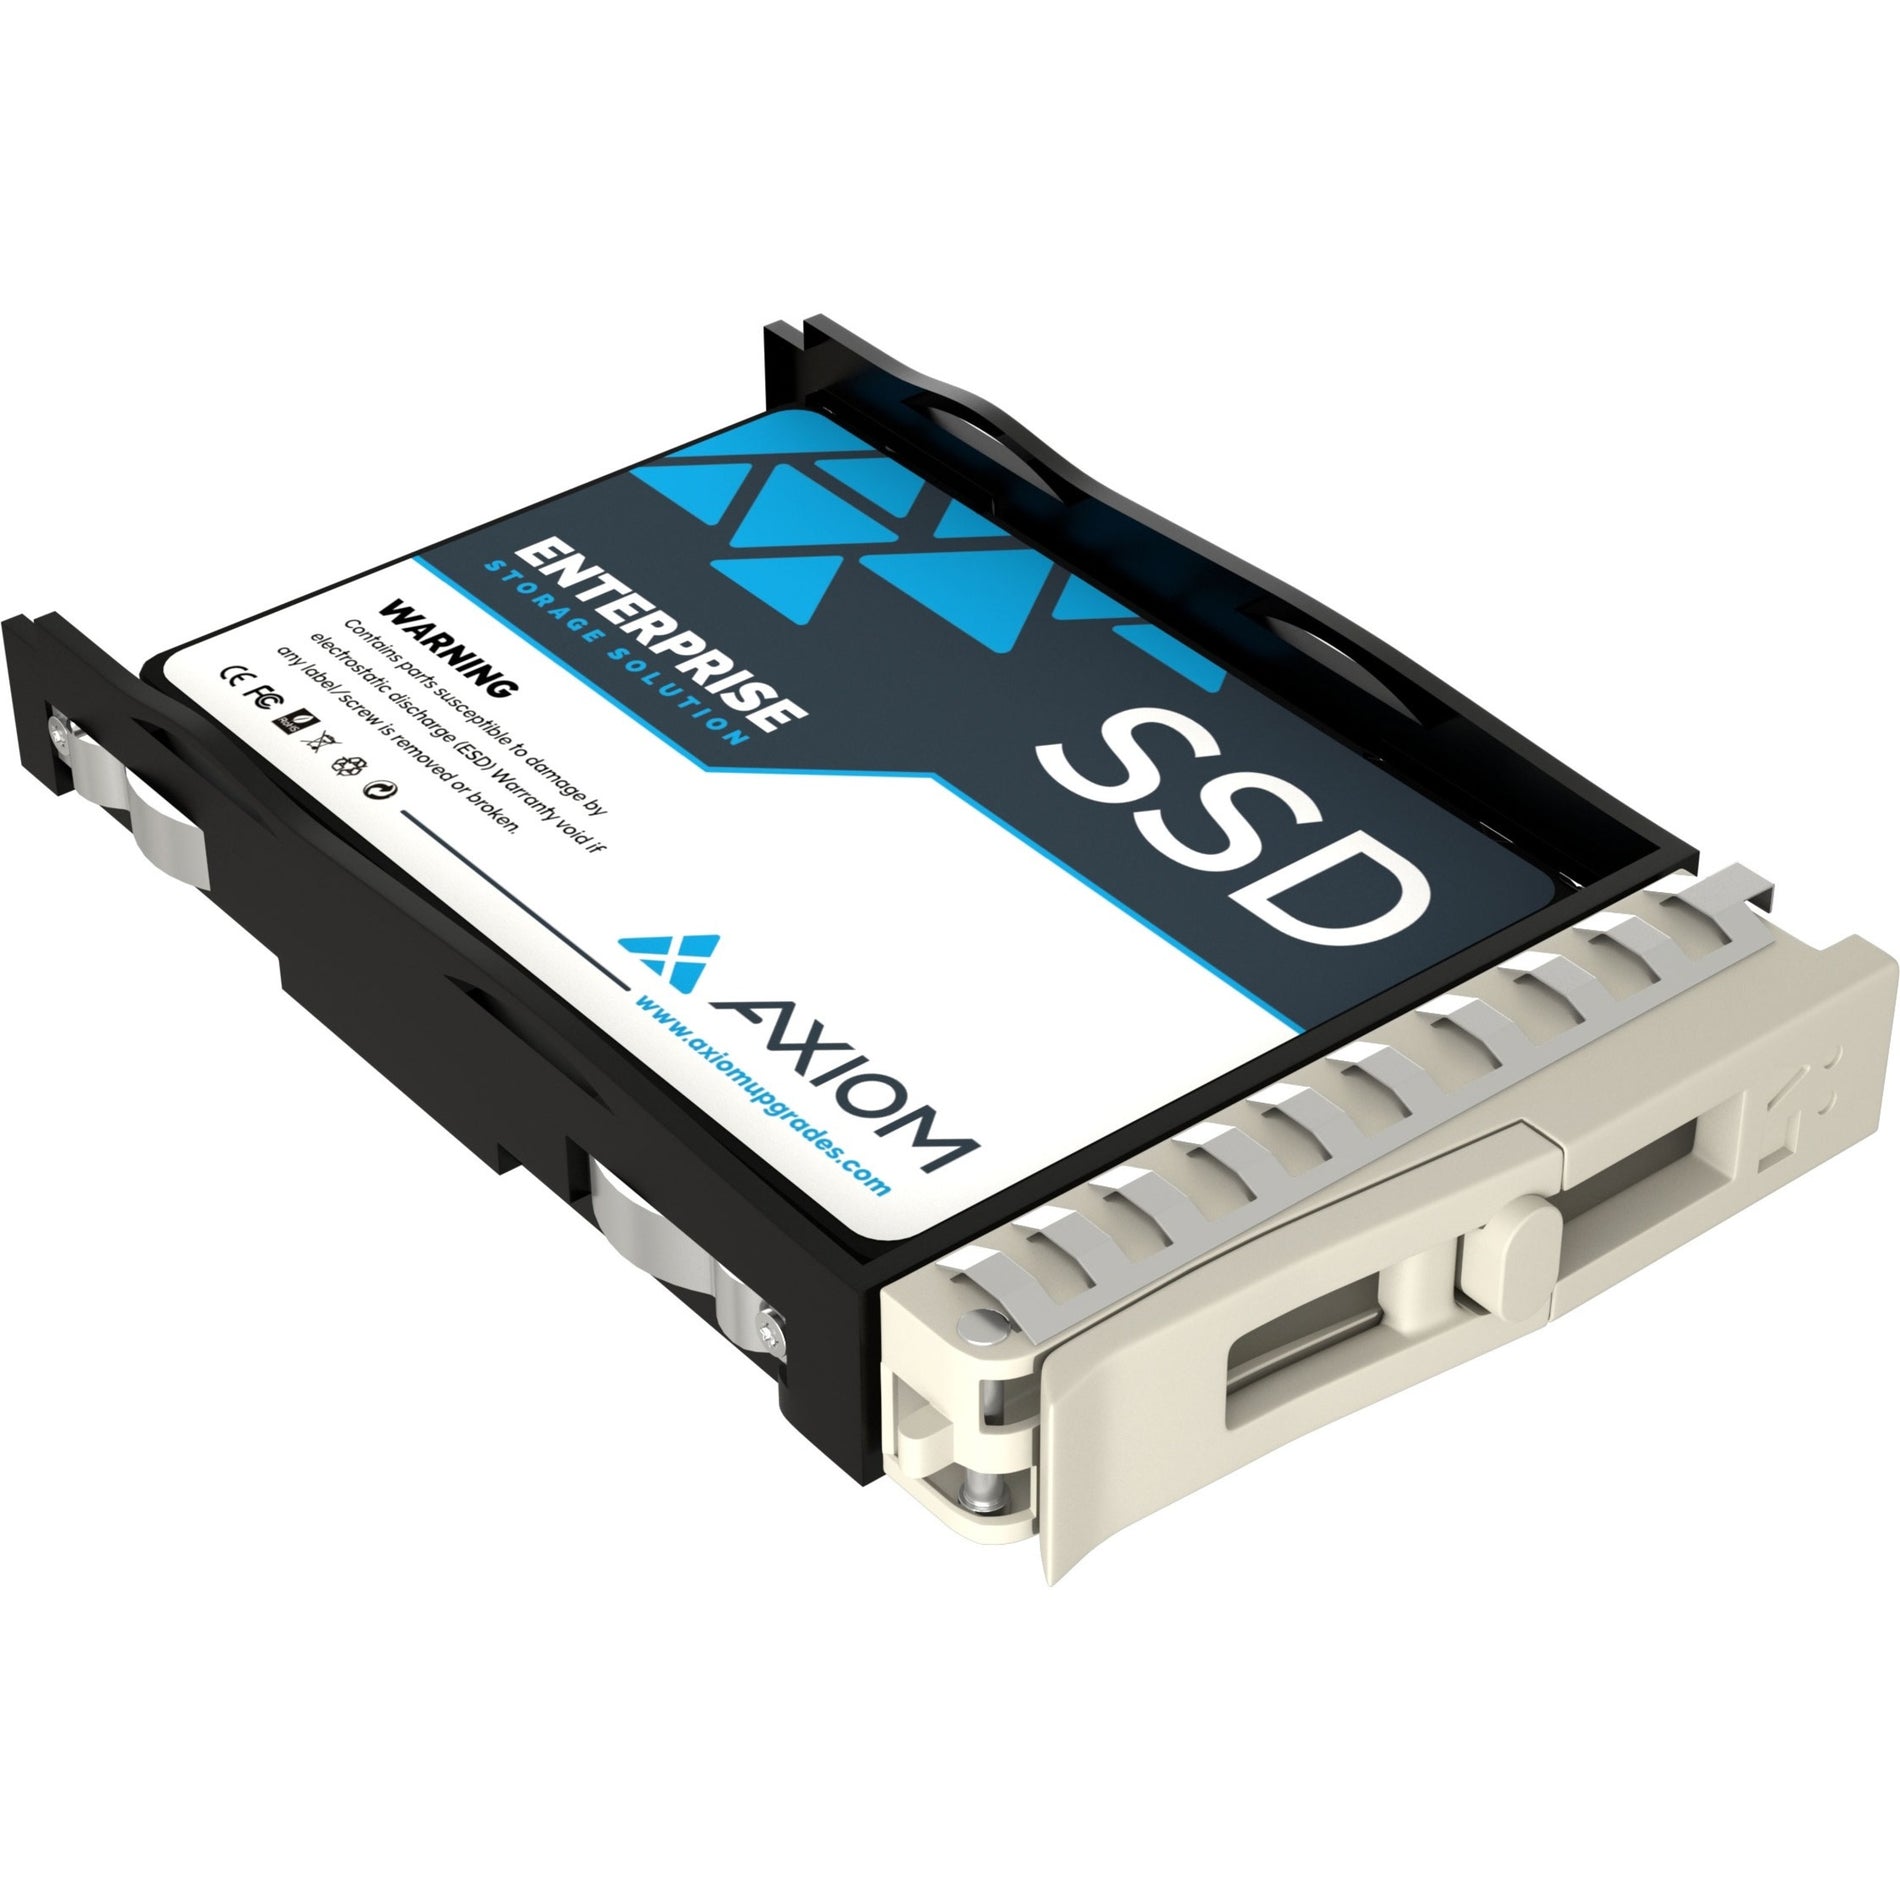 Axiom SSDEP45M53T8-AX EP450 Solid State Drive, 3.84TB Storage Capacity, 2.5" Form Factor